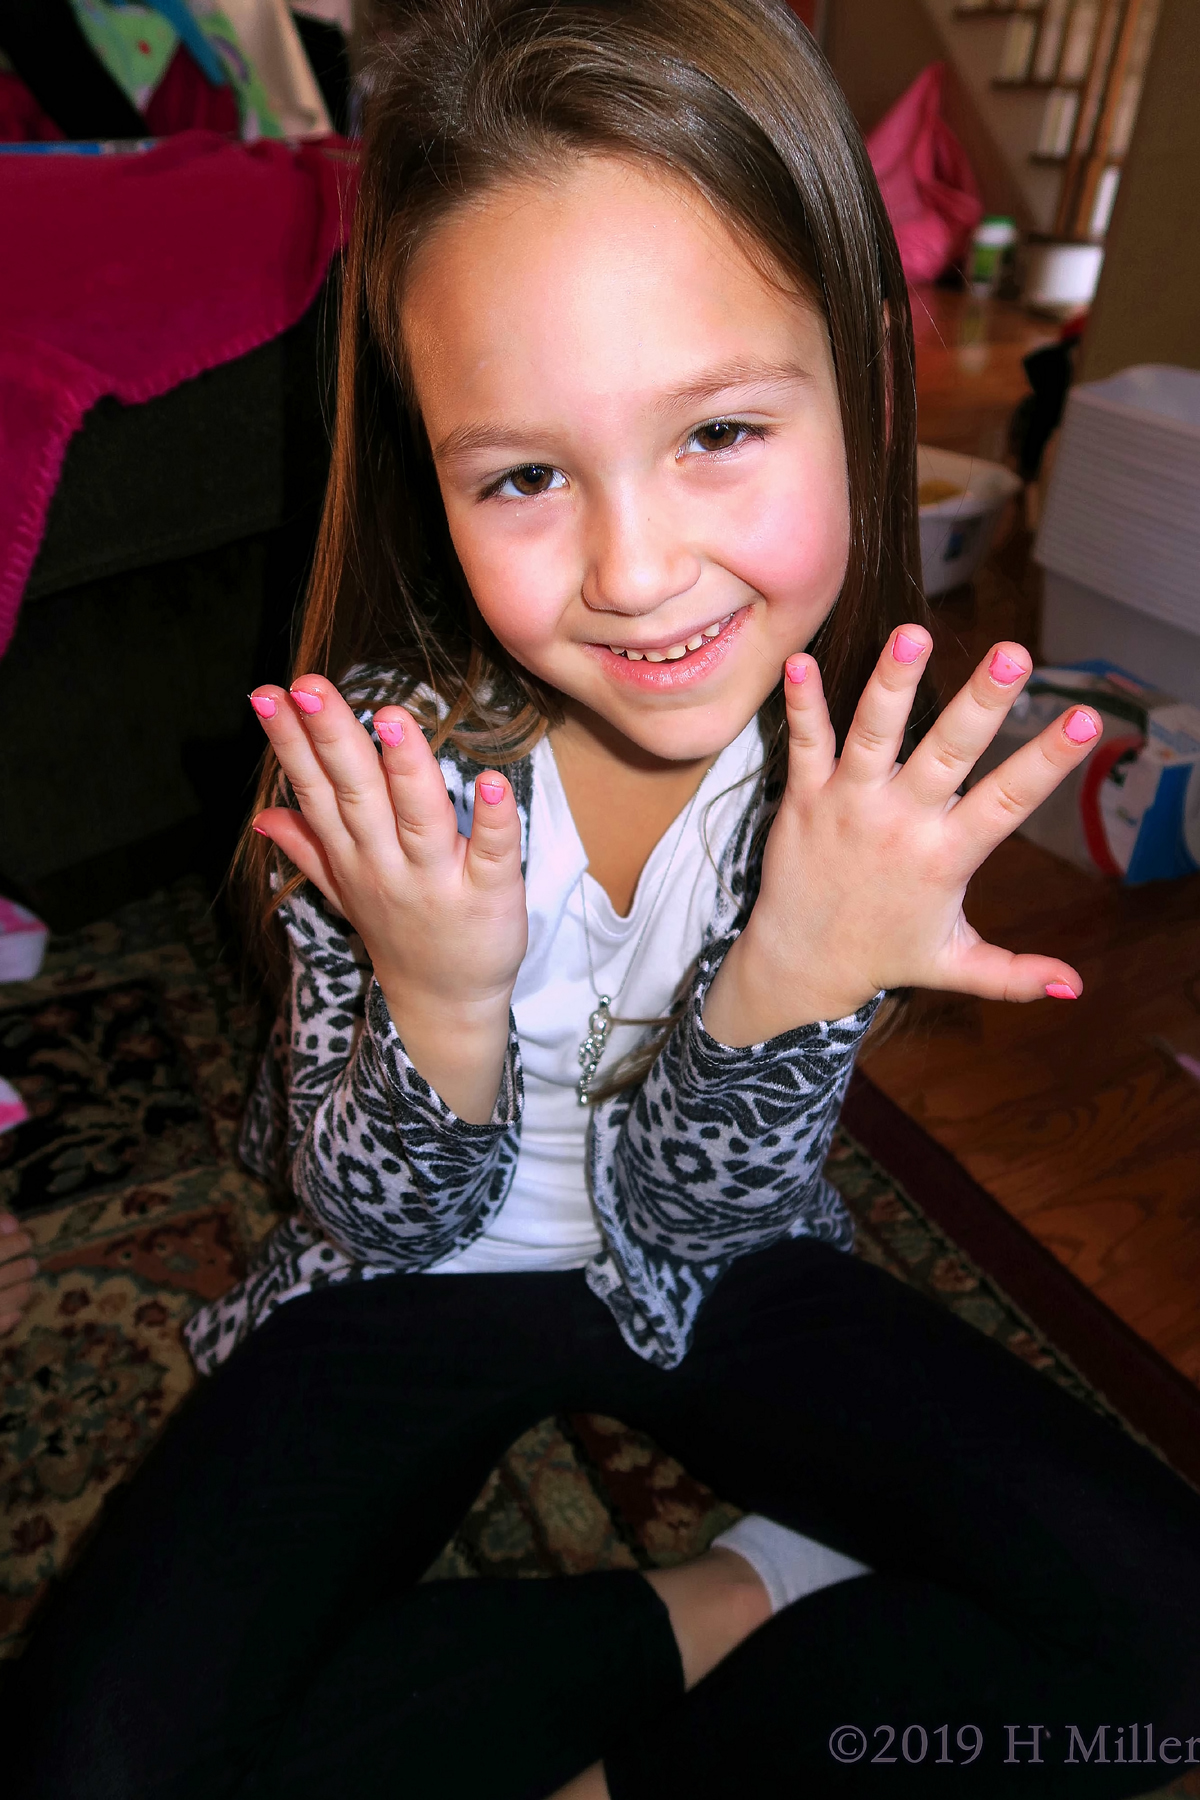 Polished Poses! Party Guest Shows Off Her Girls Manicure! 